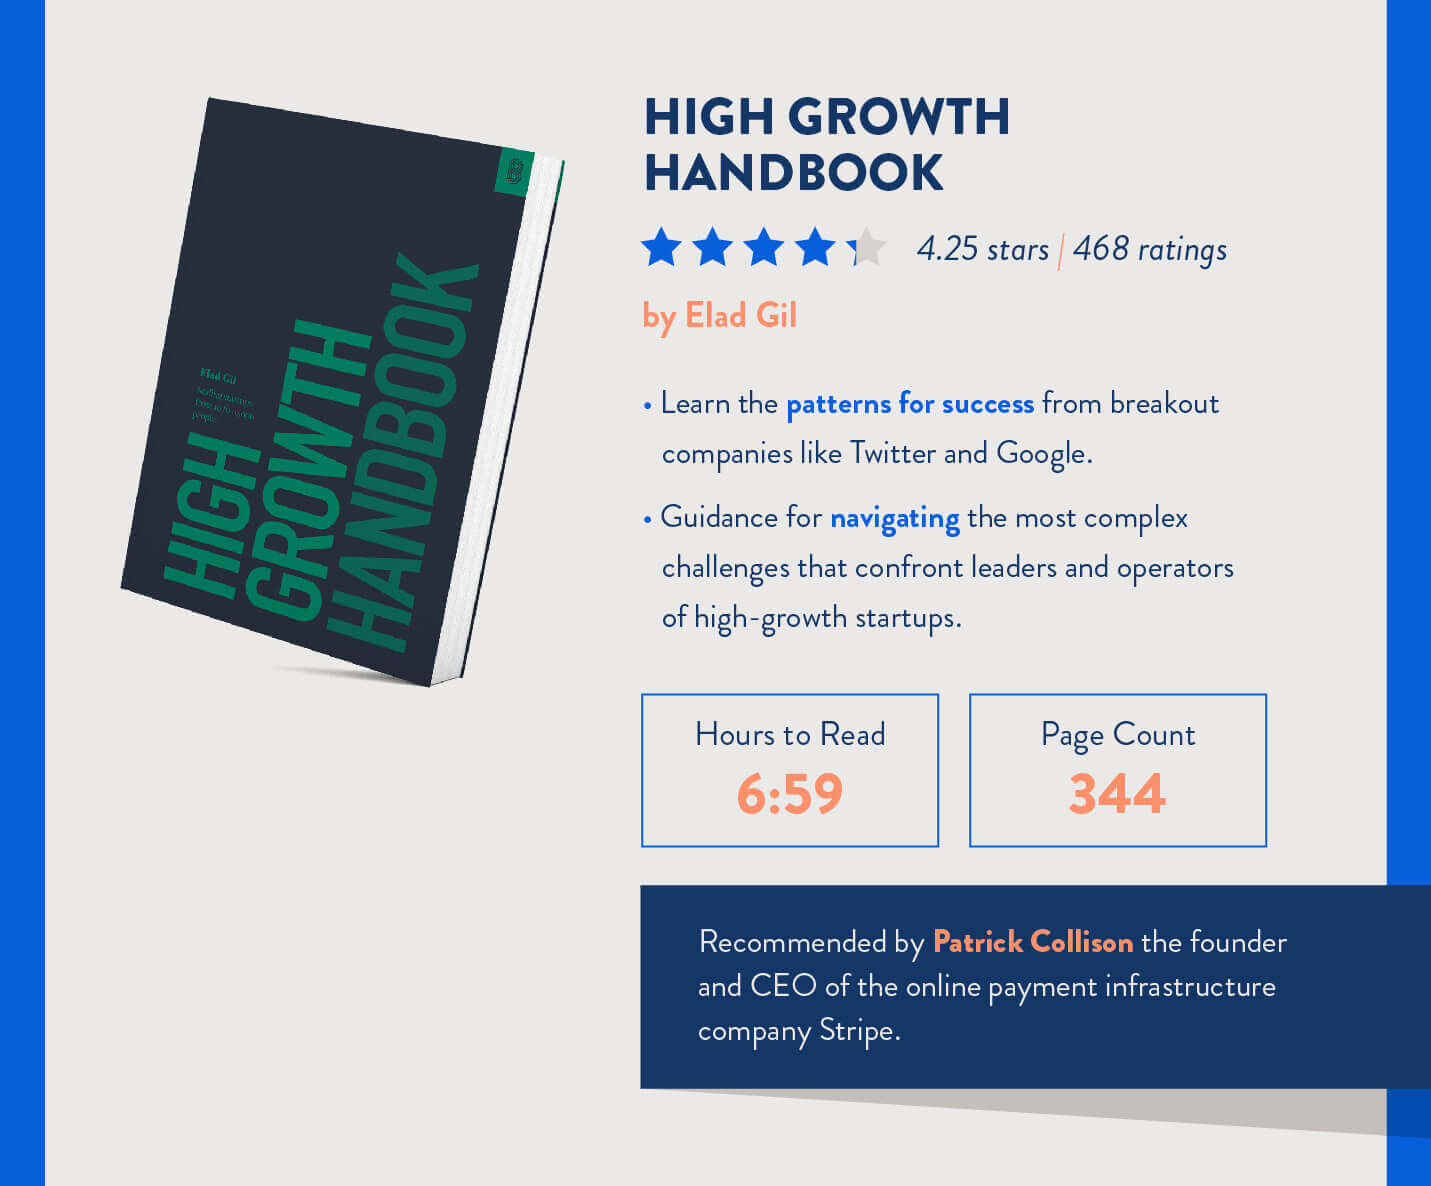 high growth handbook for mobile marketers to read recommended by Patrick Collison of Stripe